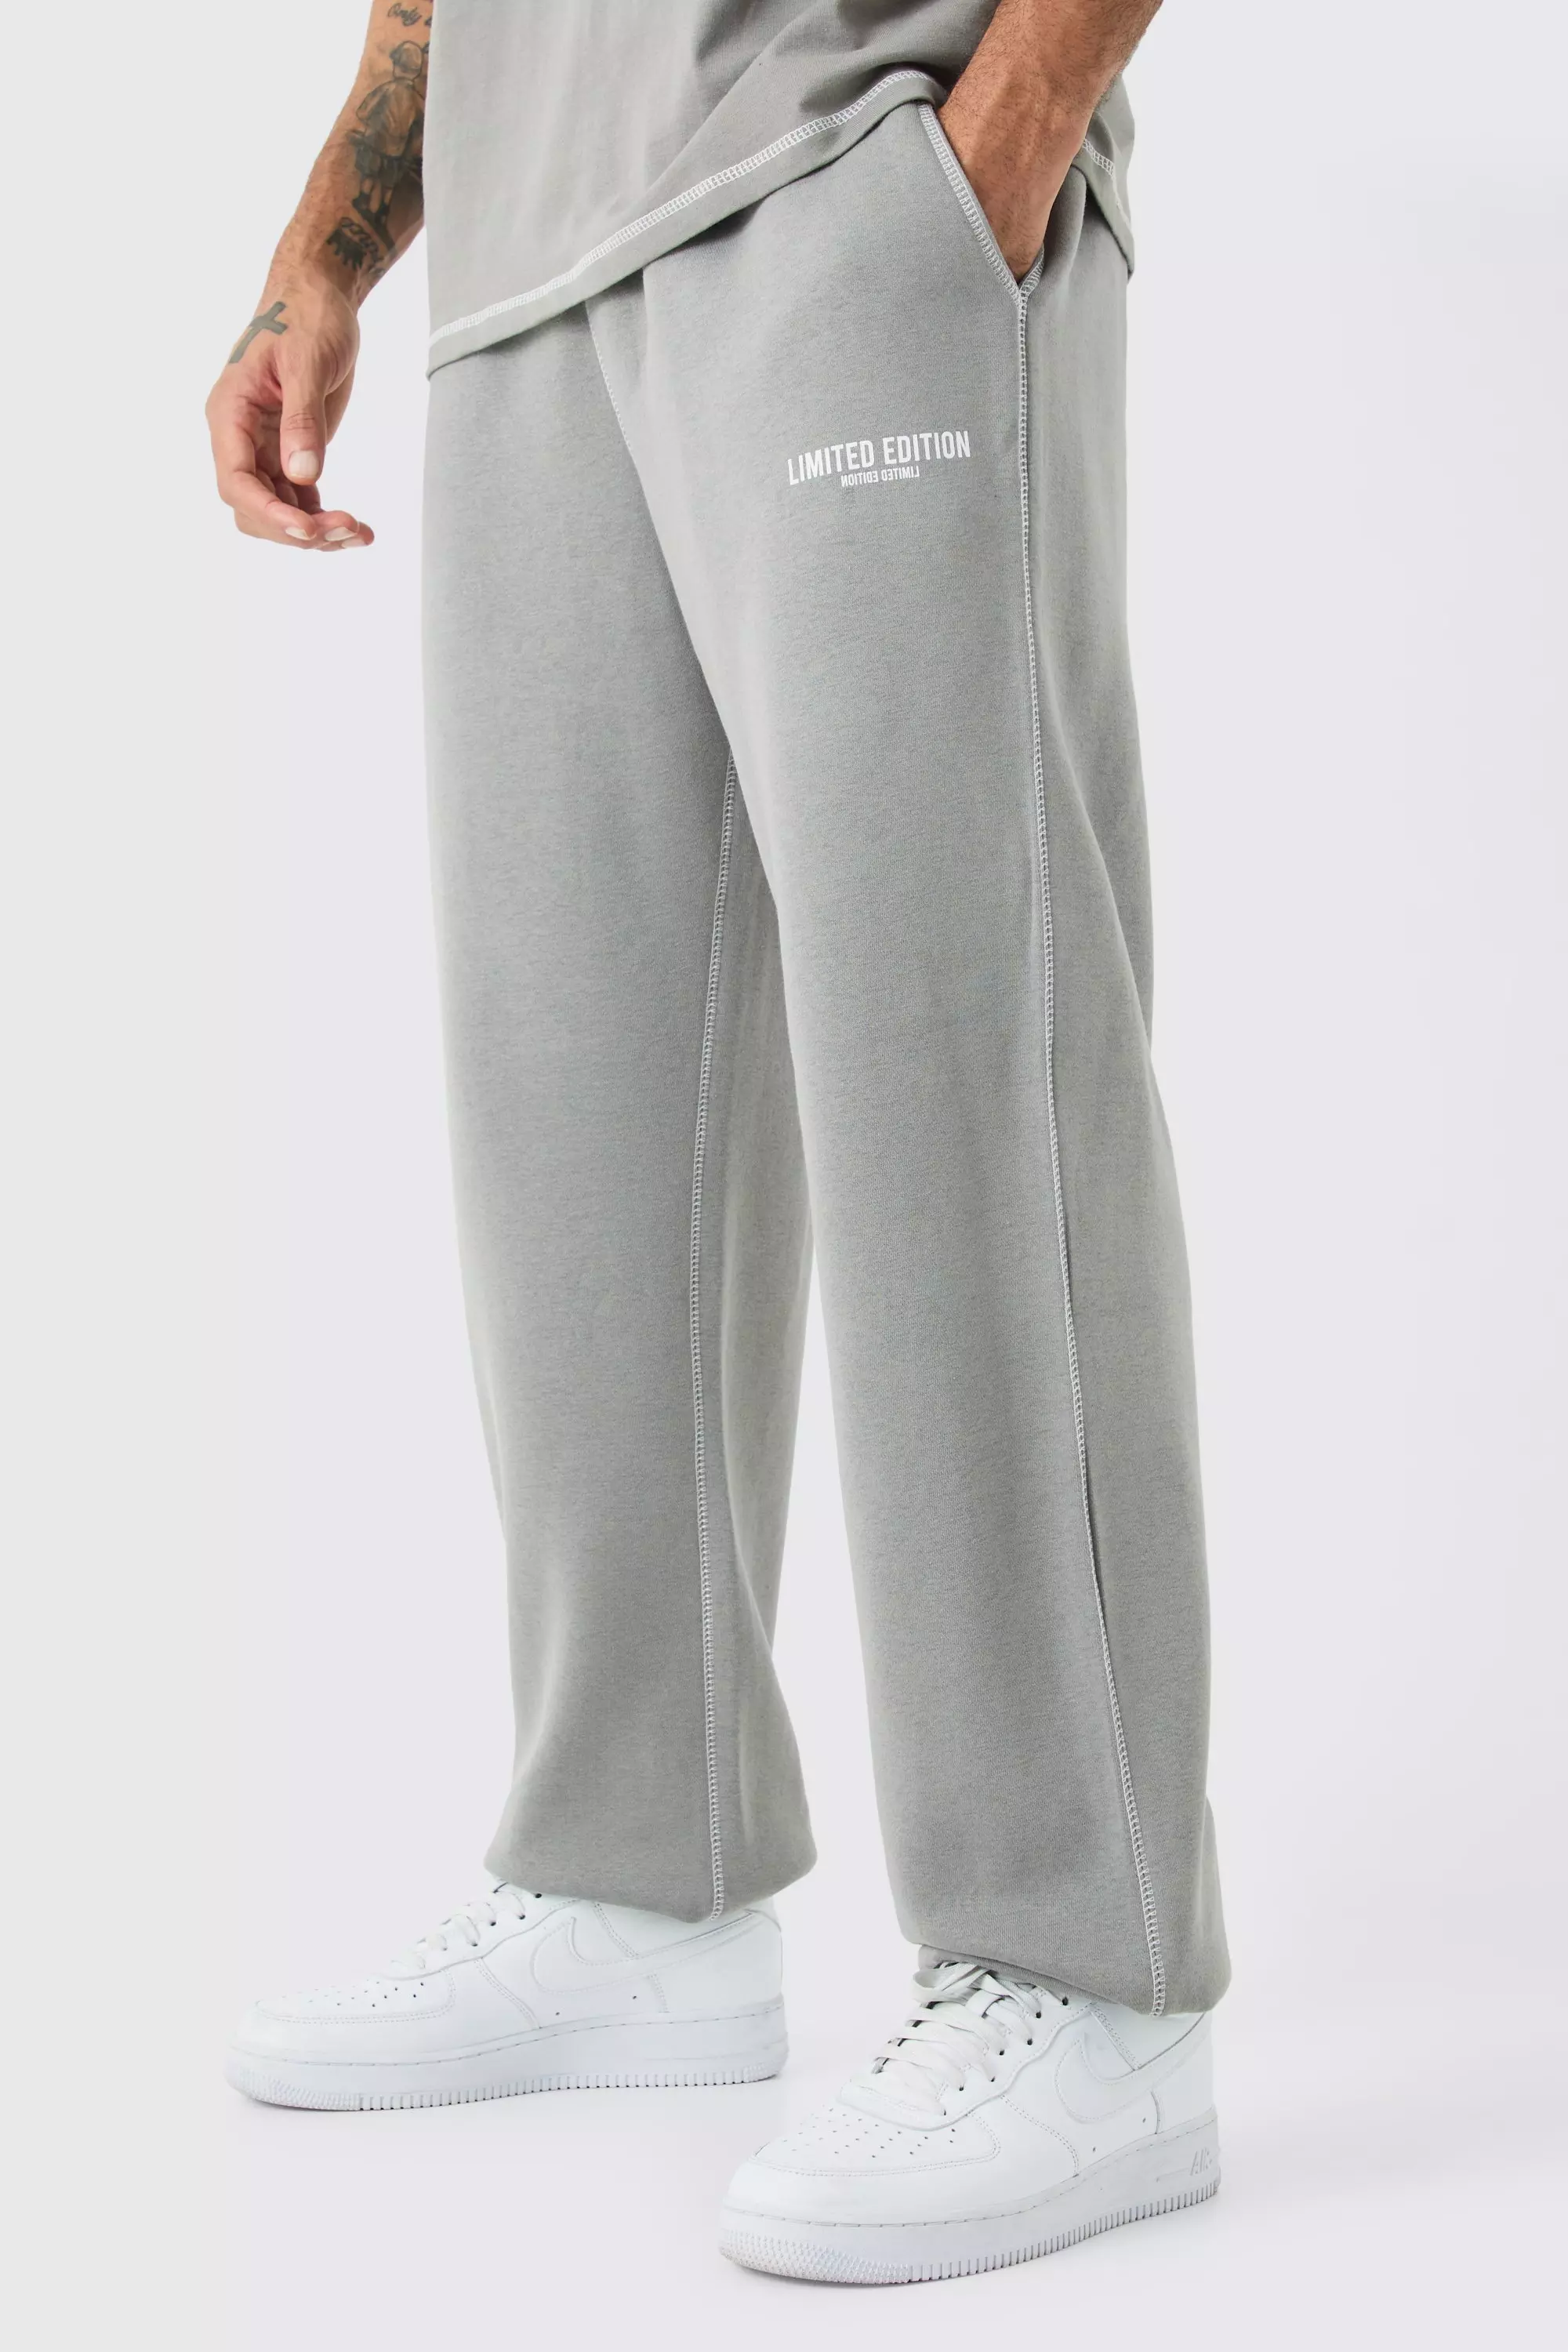 Oversized Limited Edition Contrast Stitch Jogger Charcoal